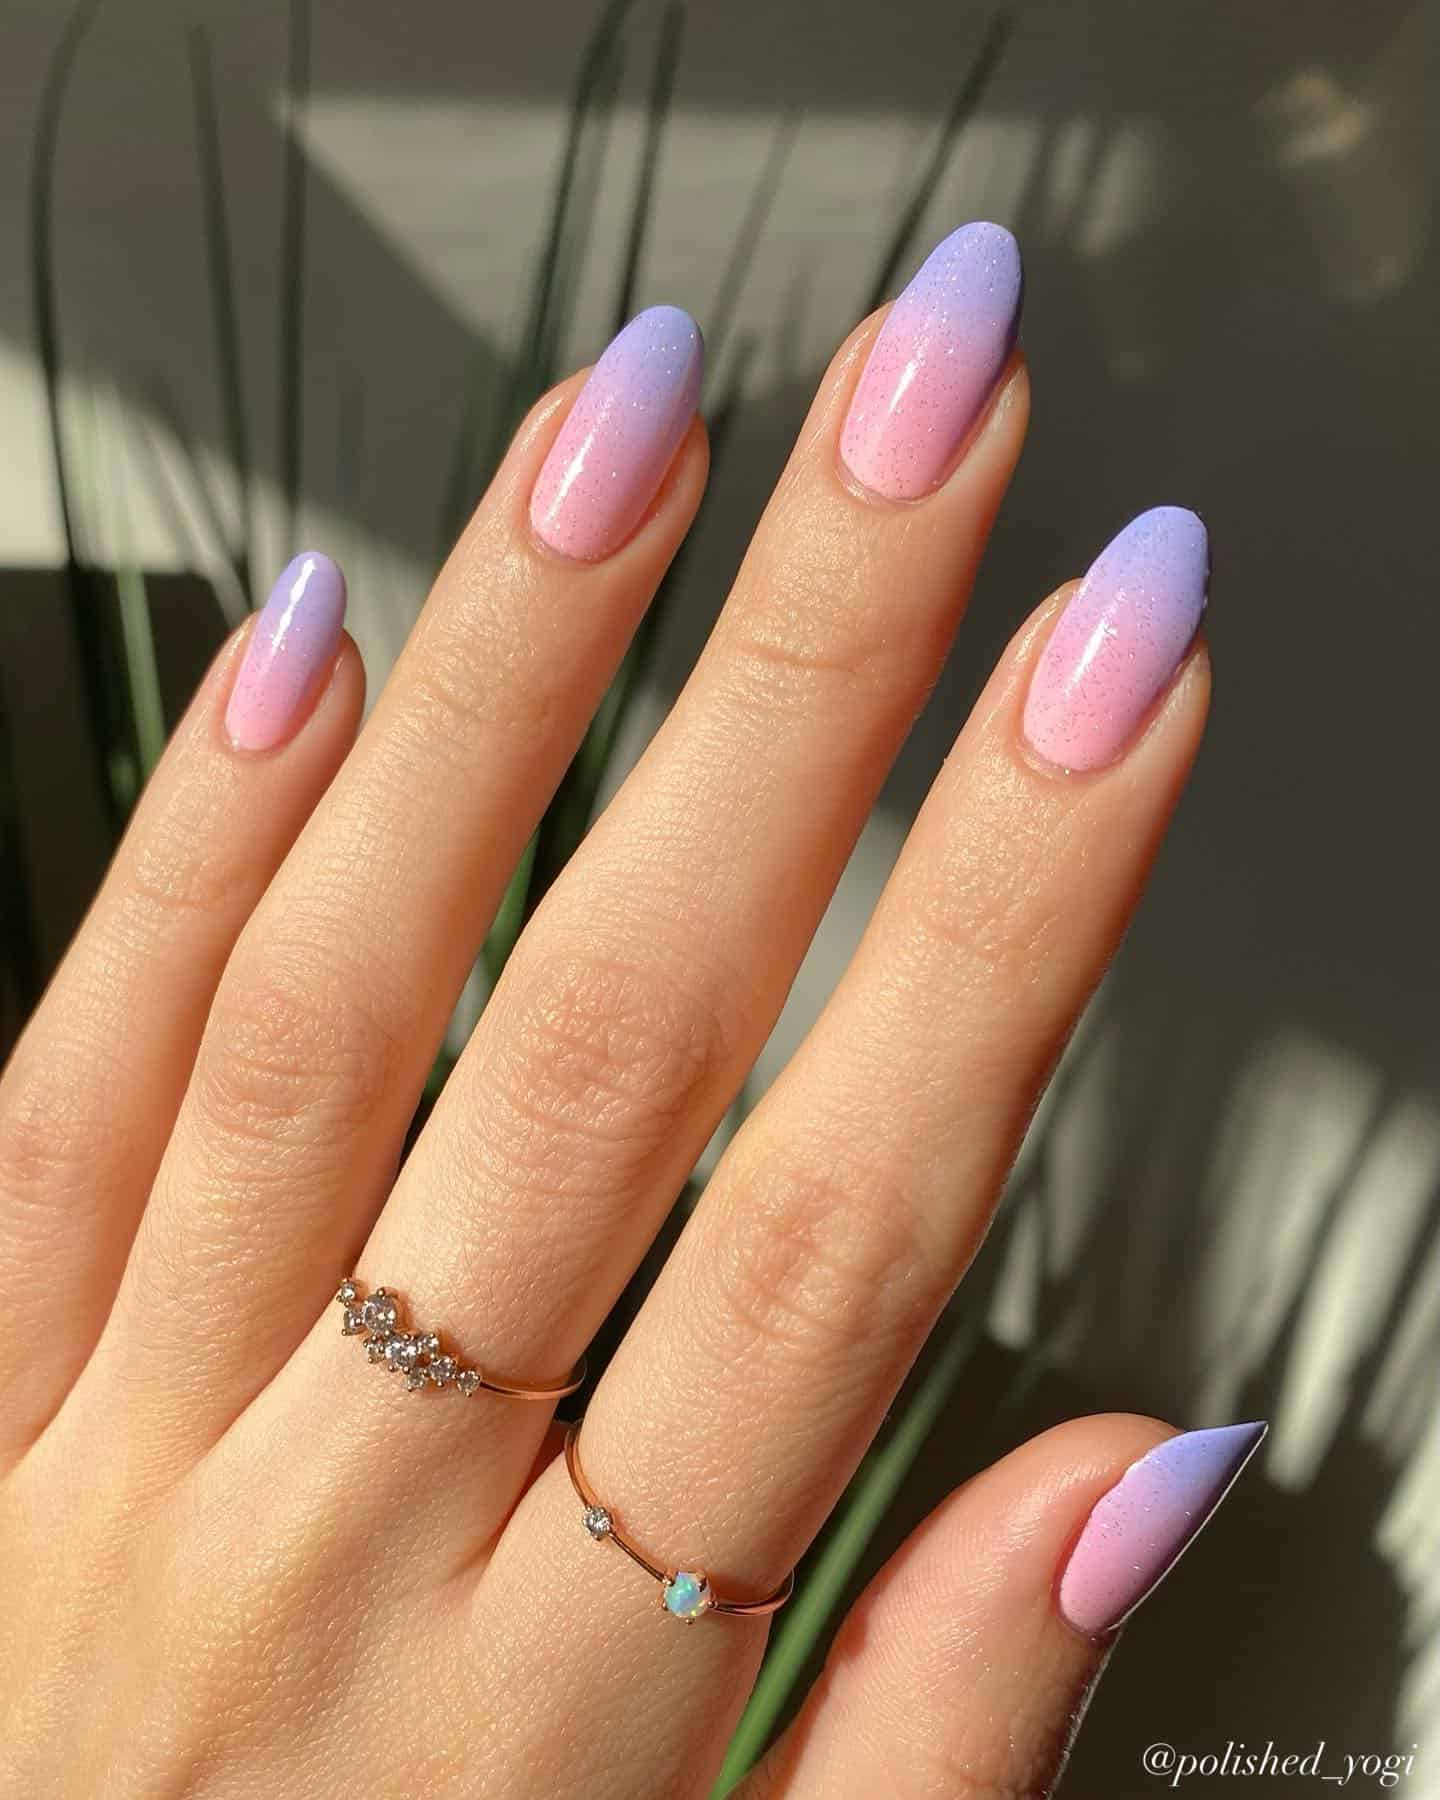 A hand with medium almond nails painted with a pink and purple ombre design and a glittering topcoat